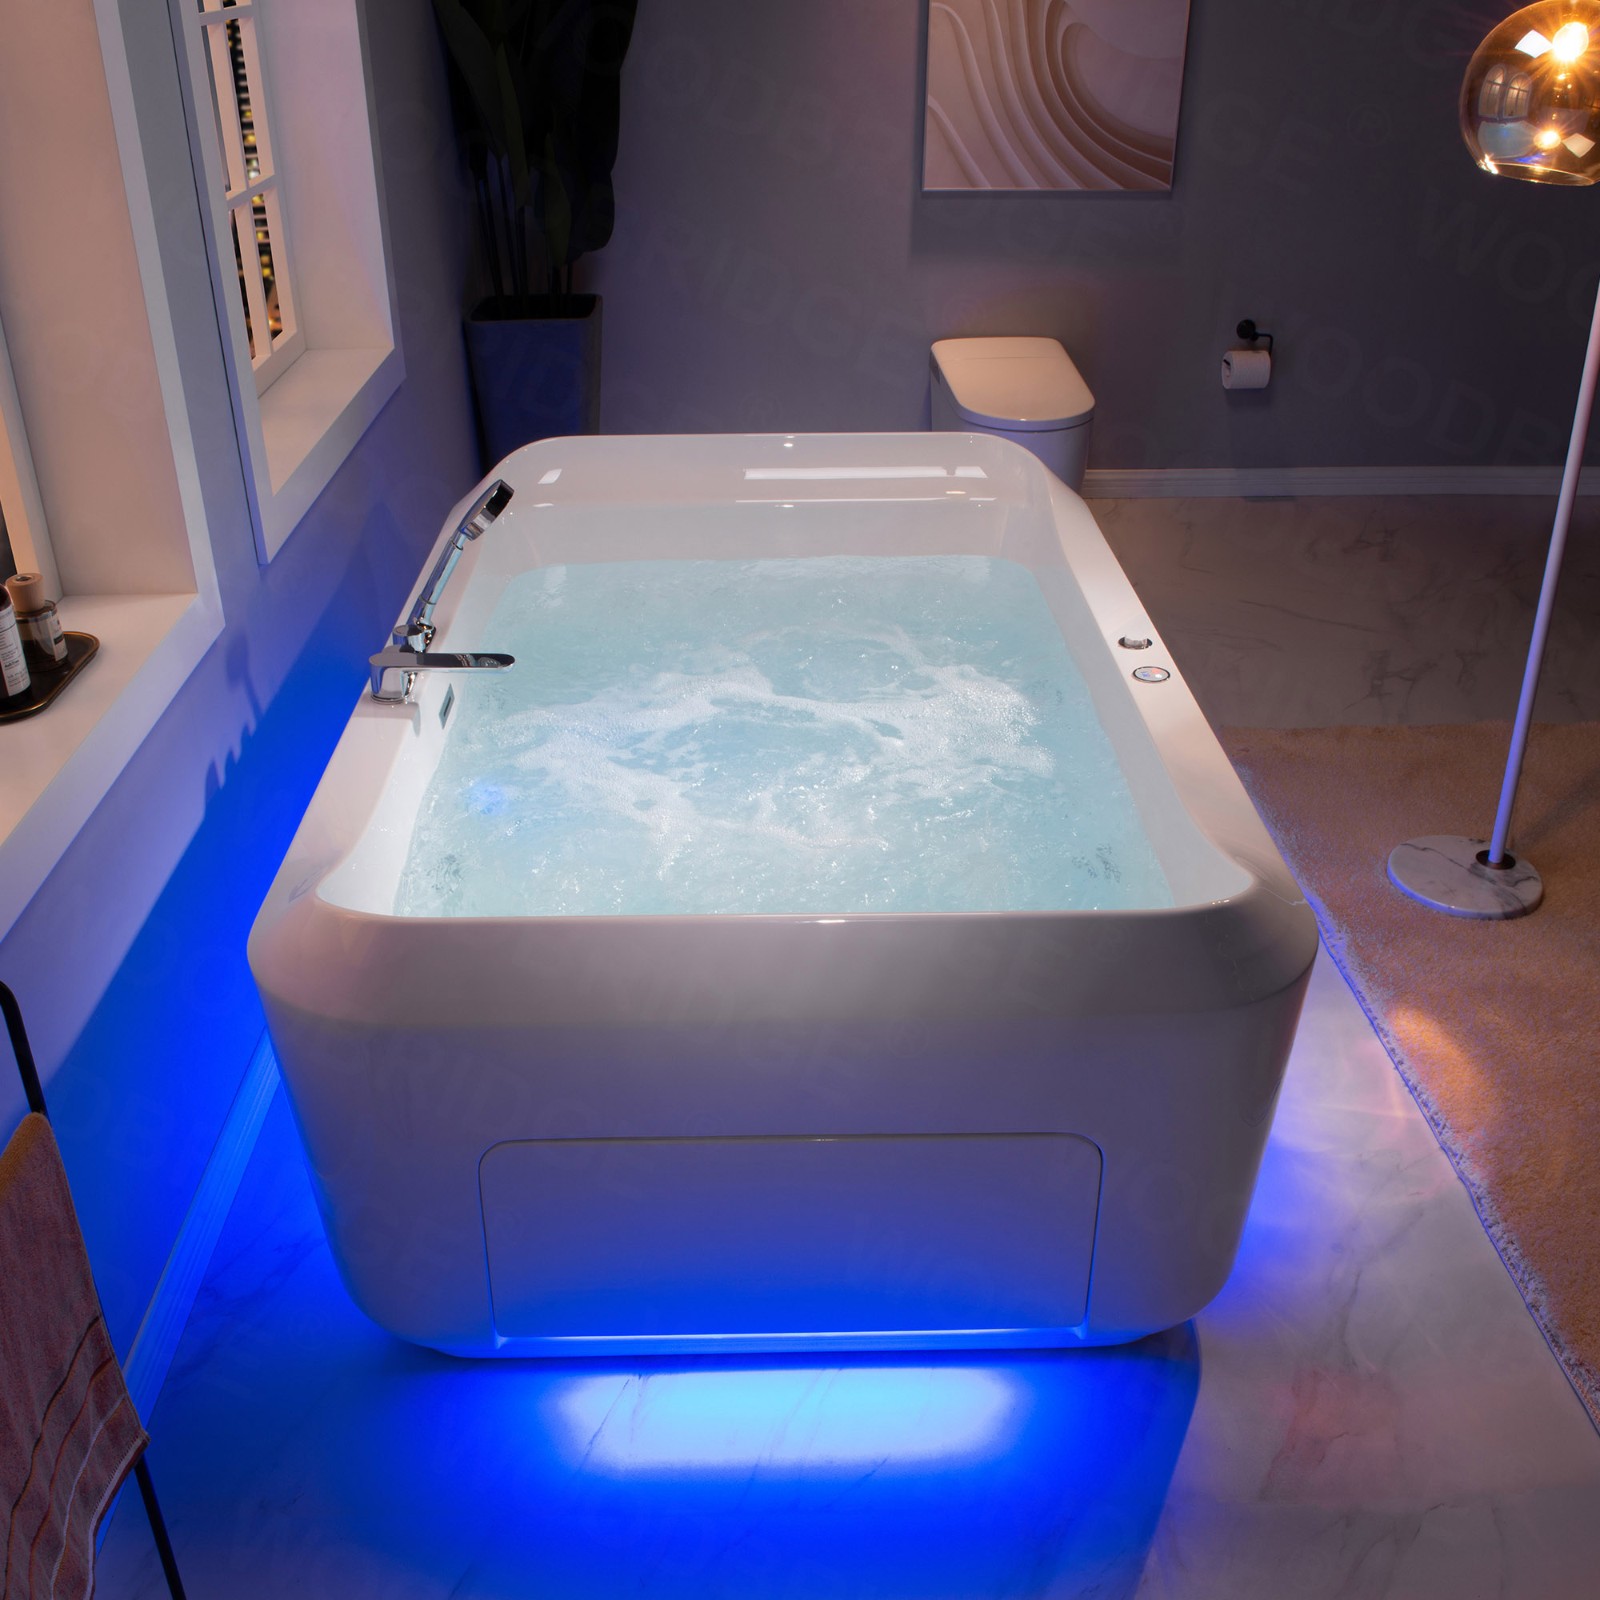  2 Person Freestanding Massage Hydrotherapy Bathtub Tub Hot Tub Spa, with Inline Heater. BTS-0091_9096